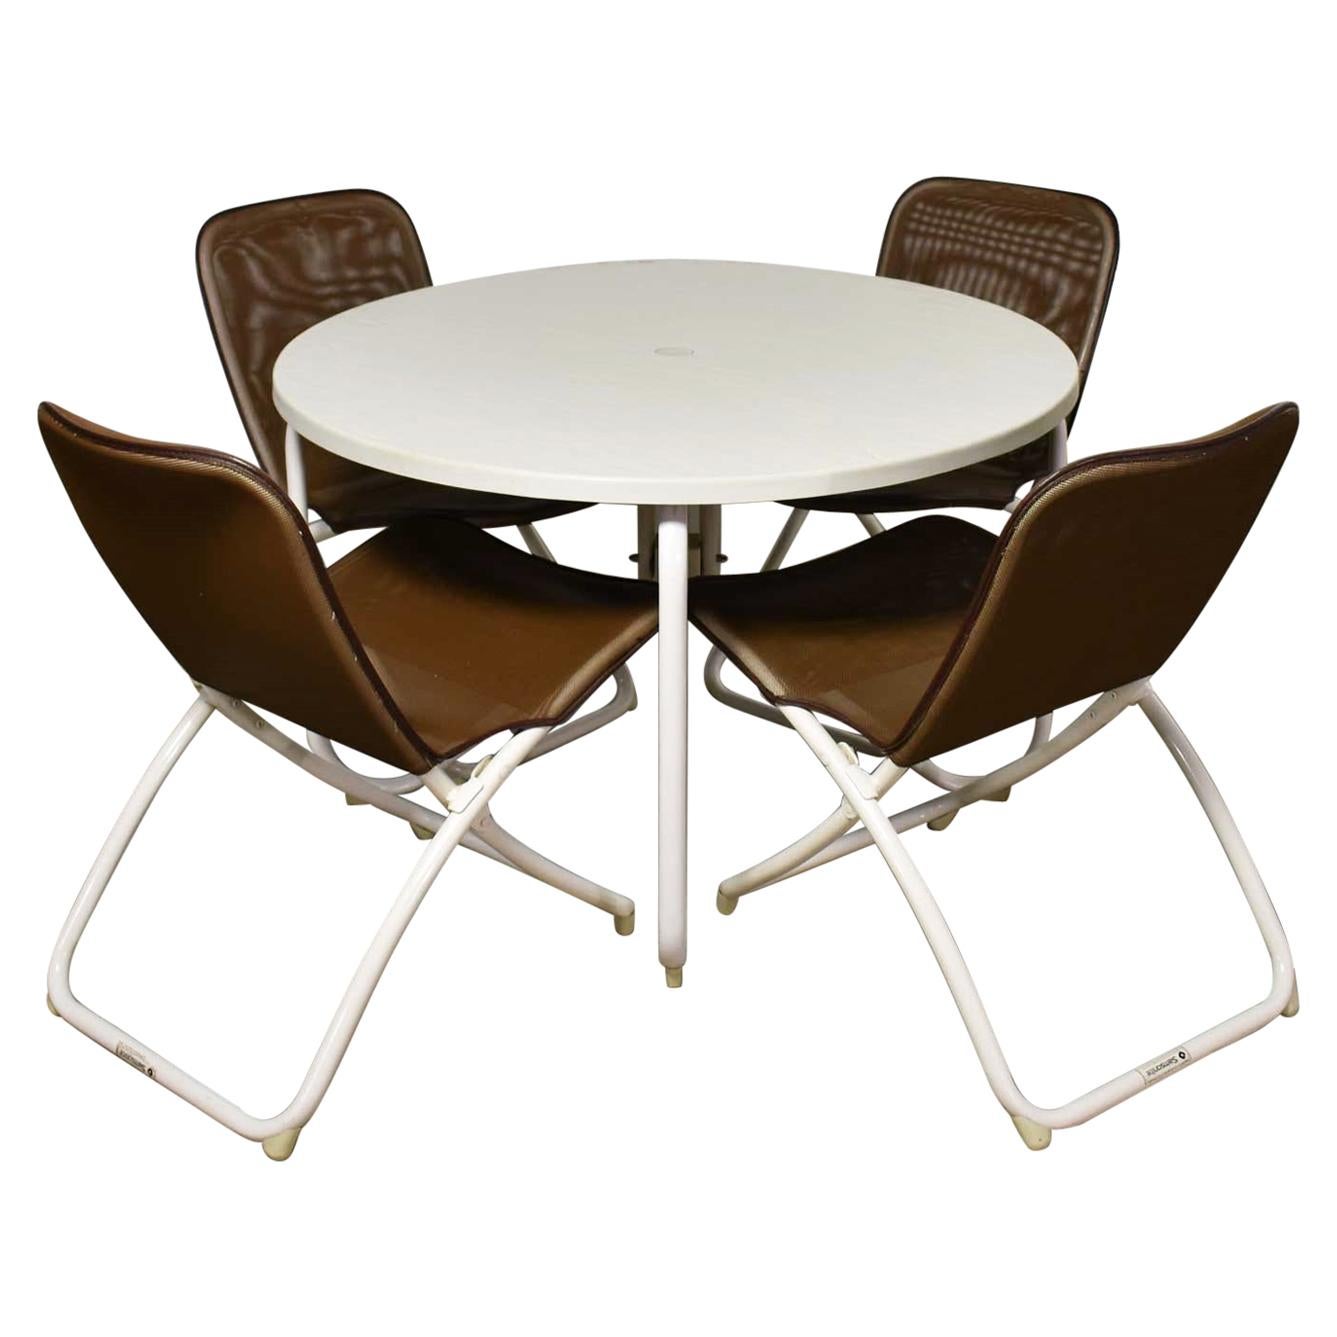 Mid-Century Modern Samsonite Round Patio Dining Table and 4 Folding Sling Chairs